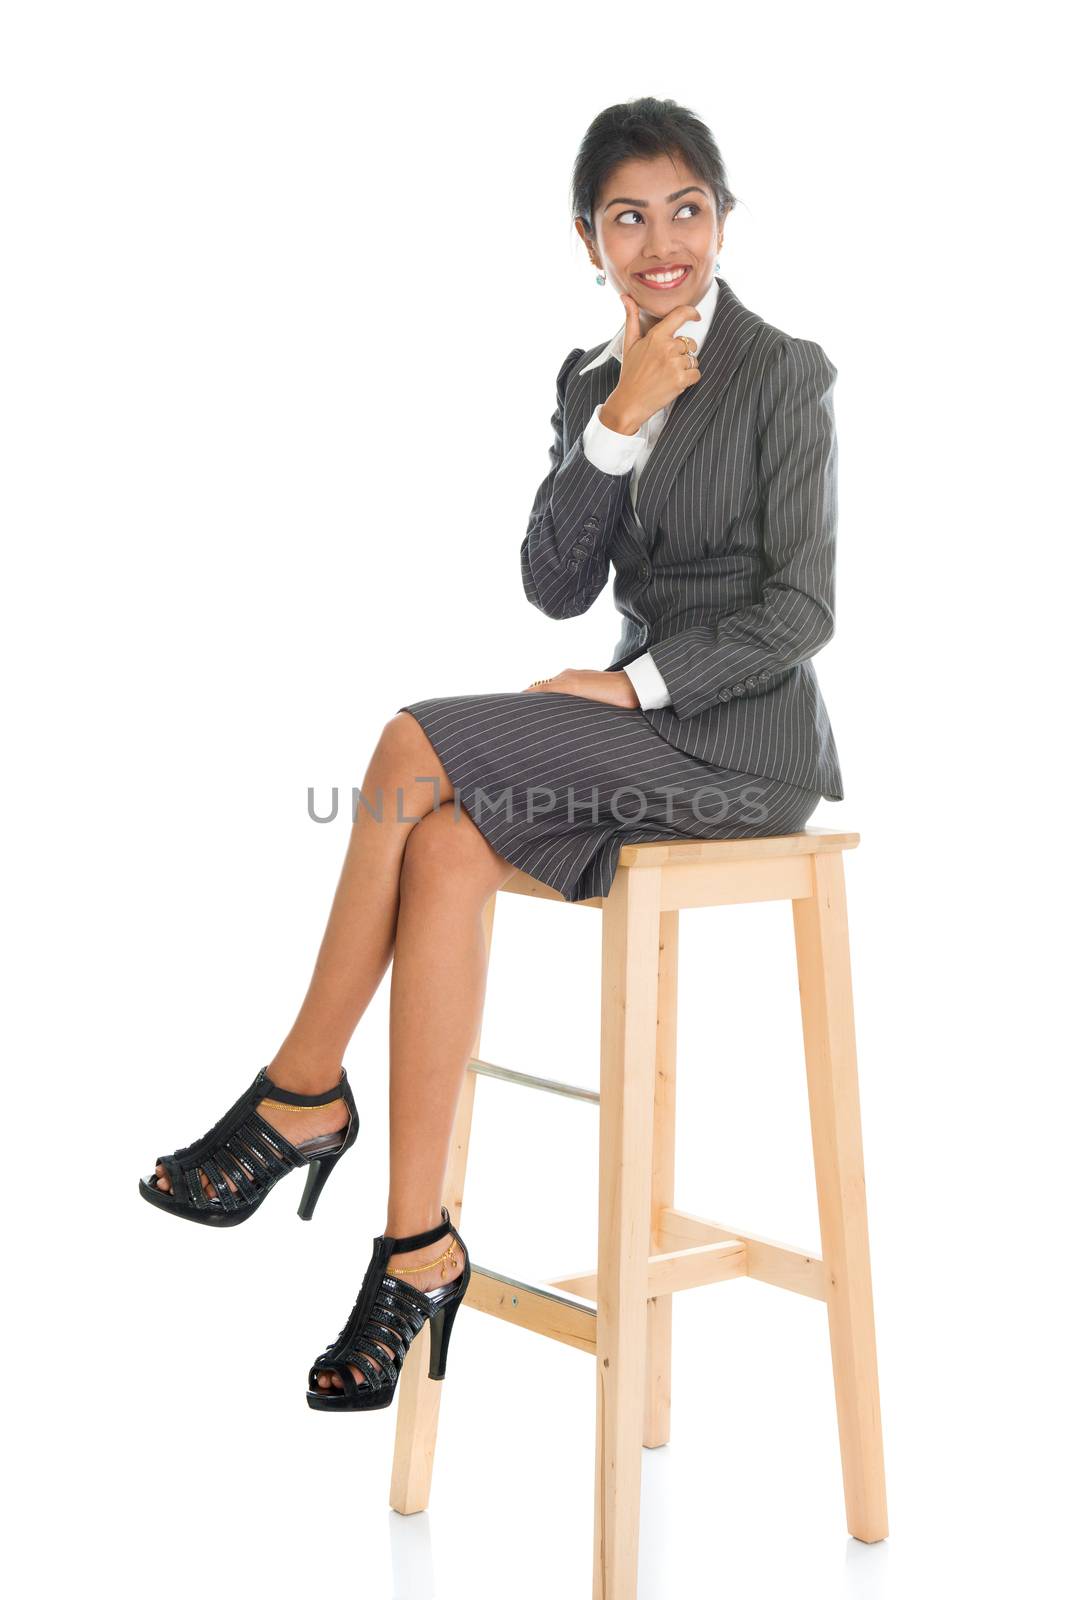 Black business woman seated on chair. by szefei